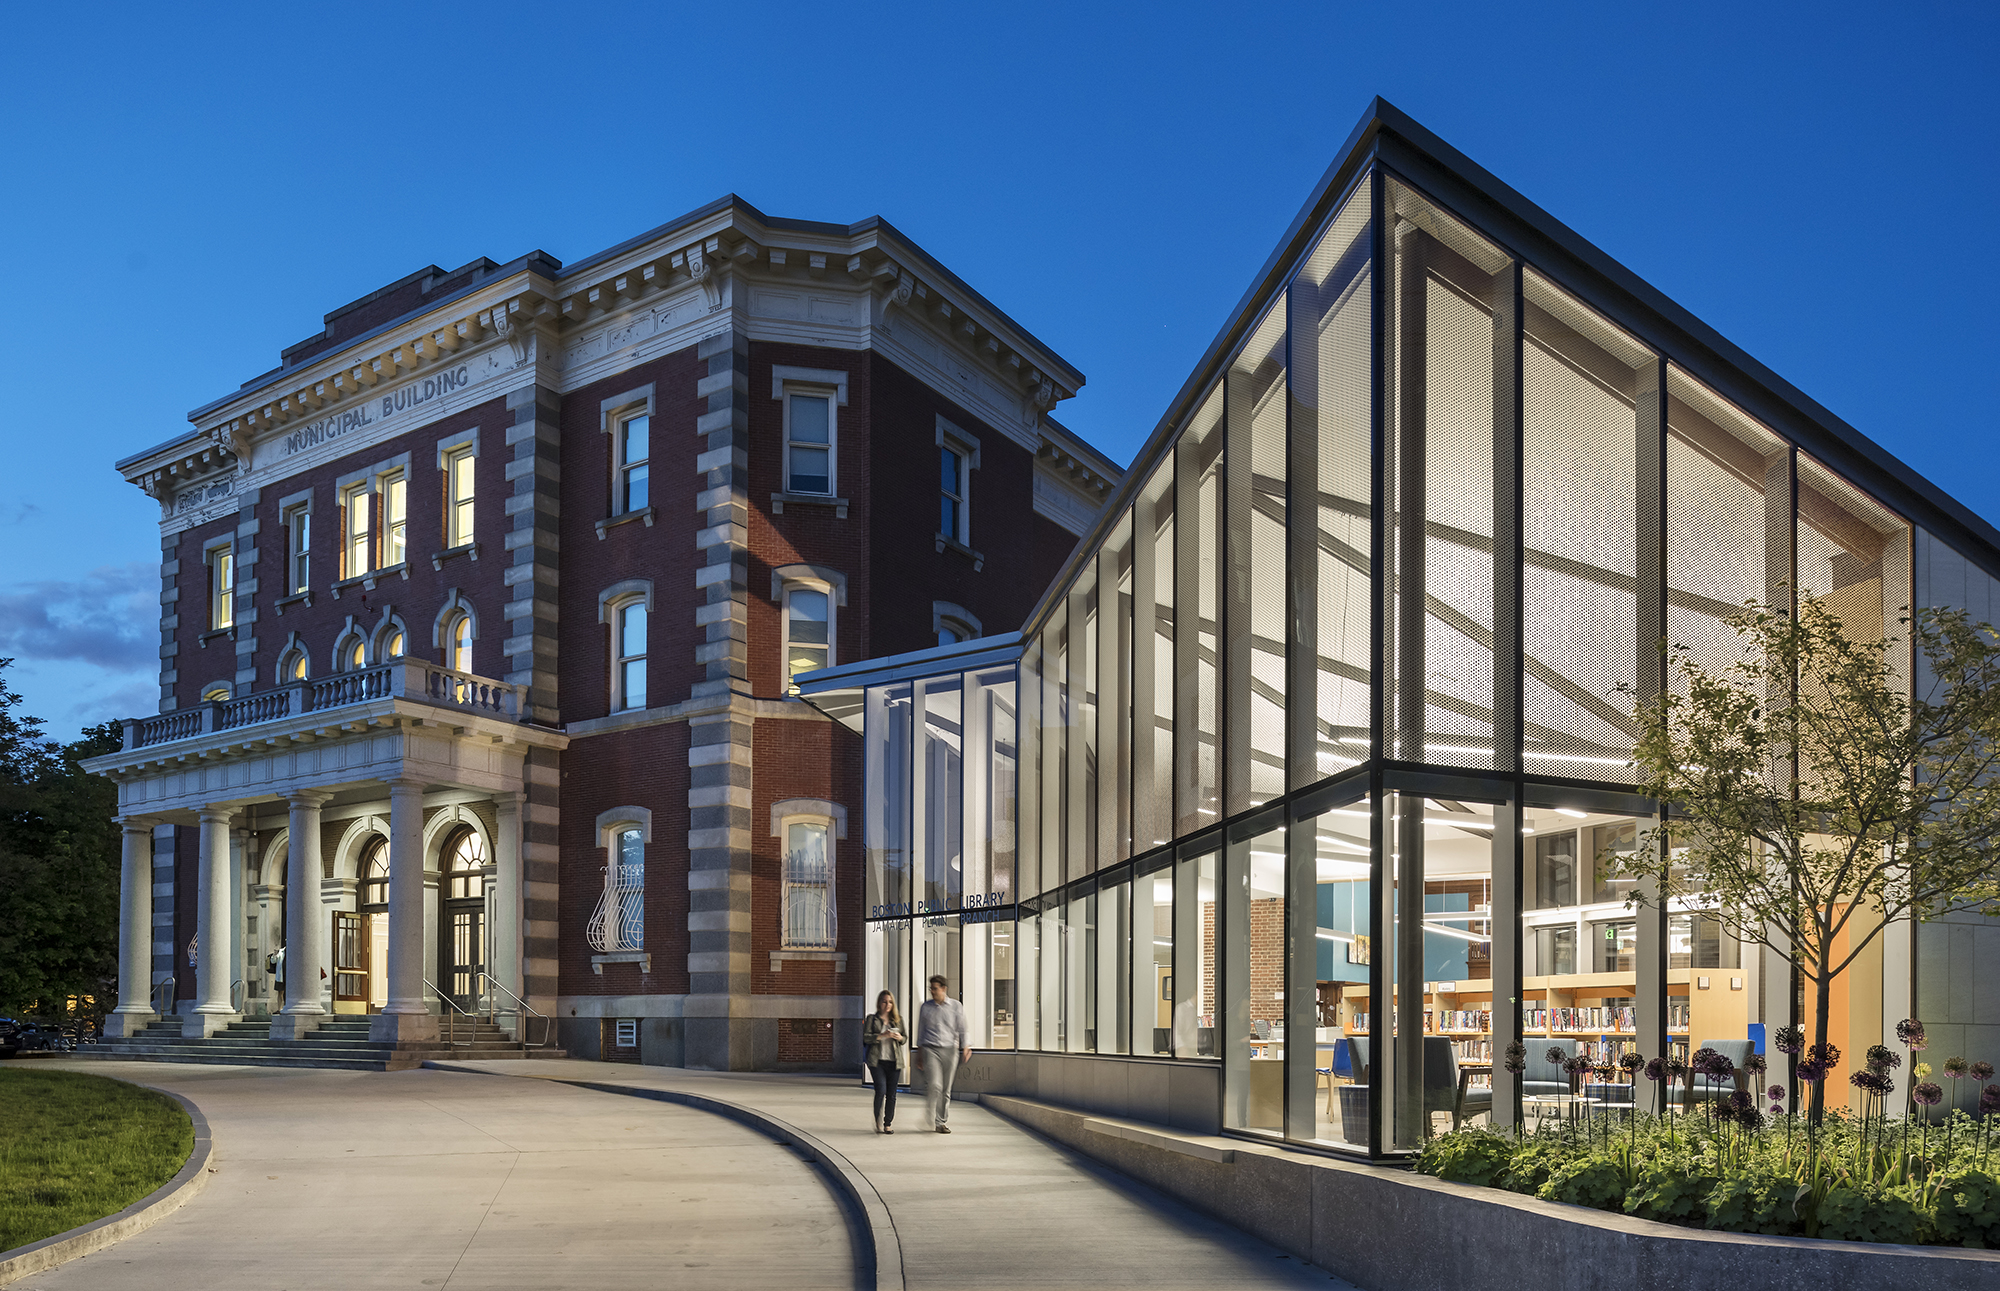 New photos of the Jamaica Plain Branch of the Boston Public Library